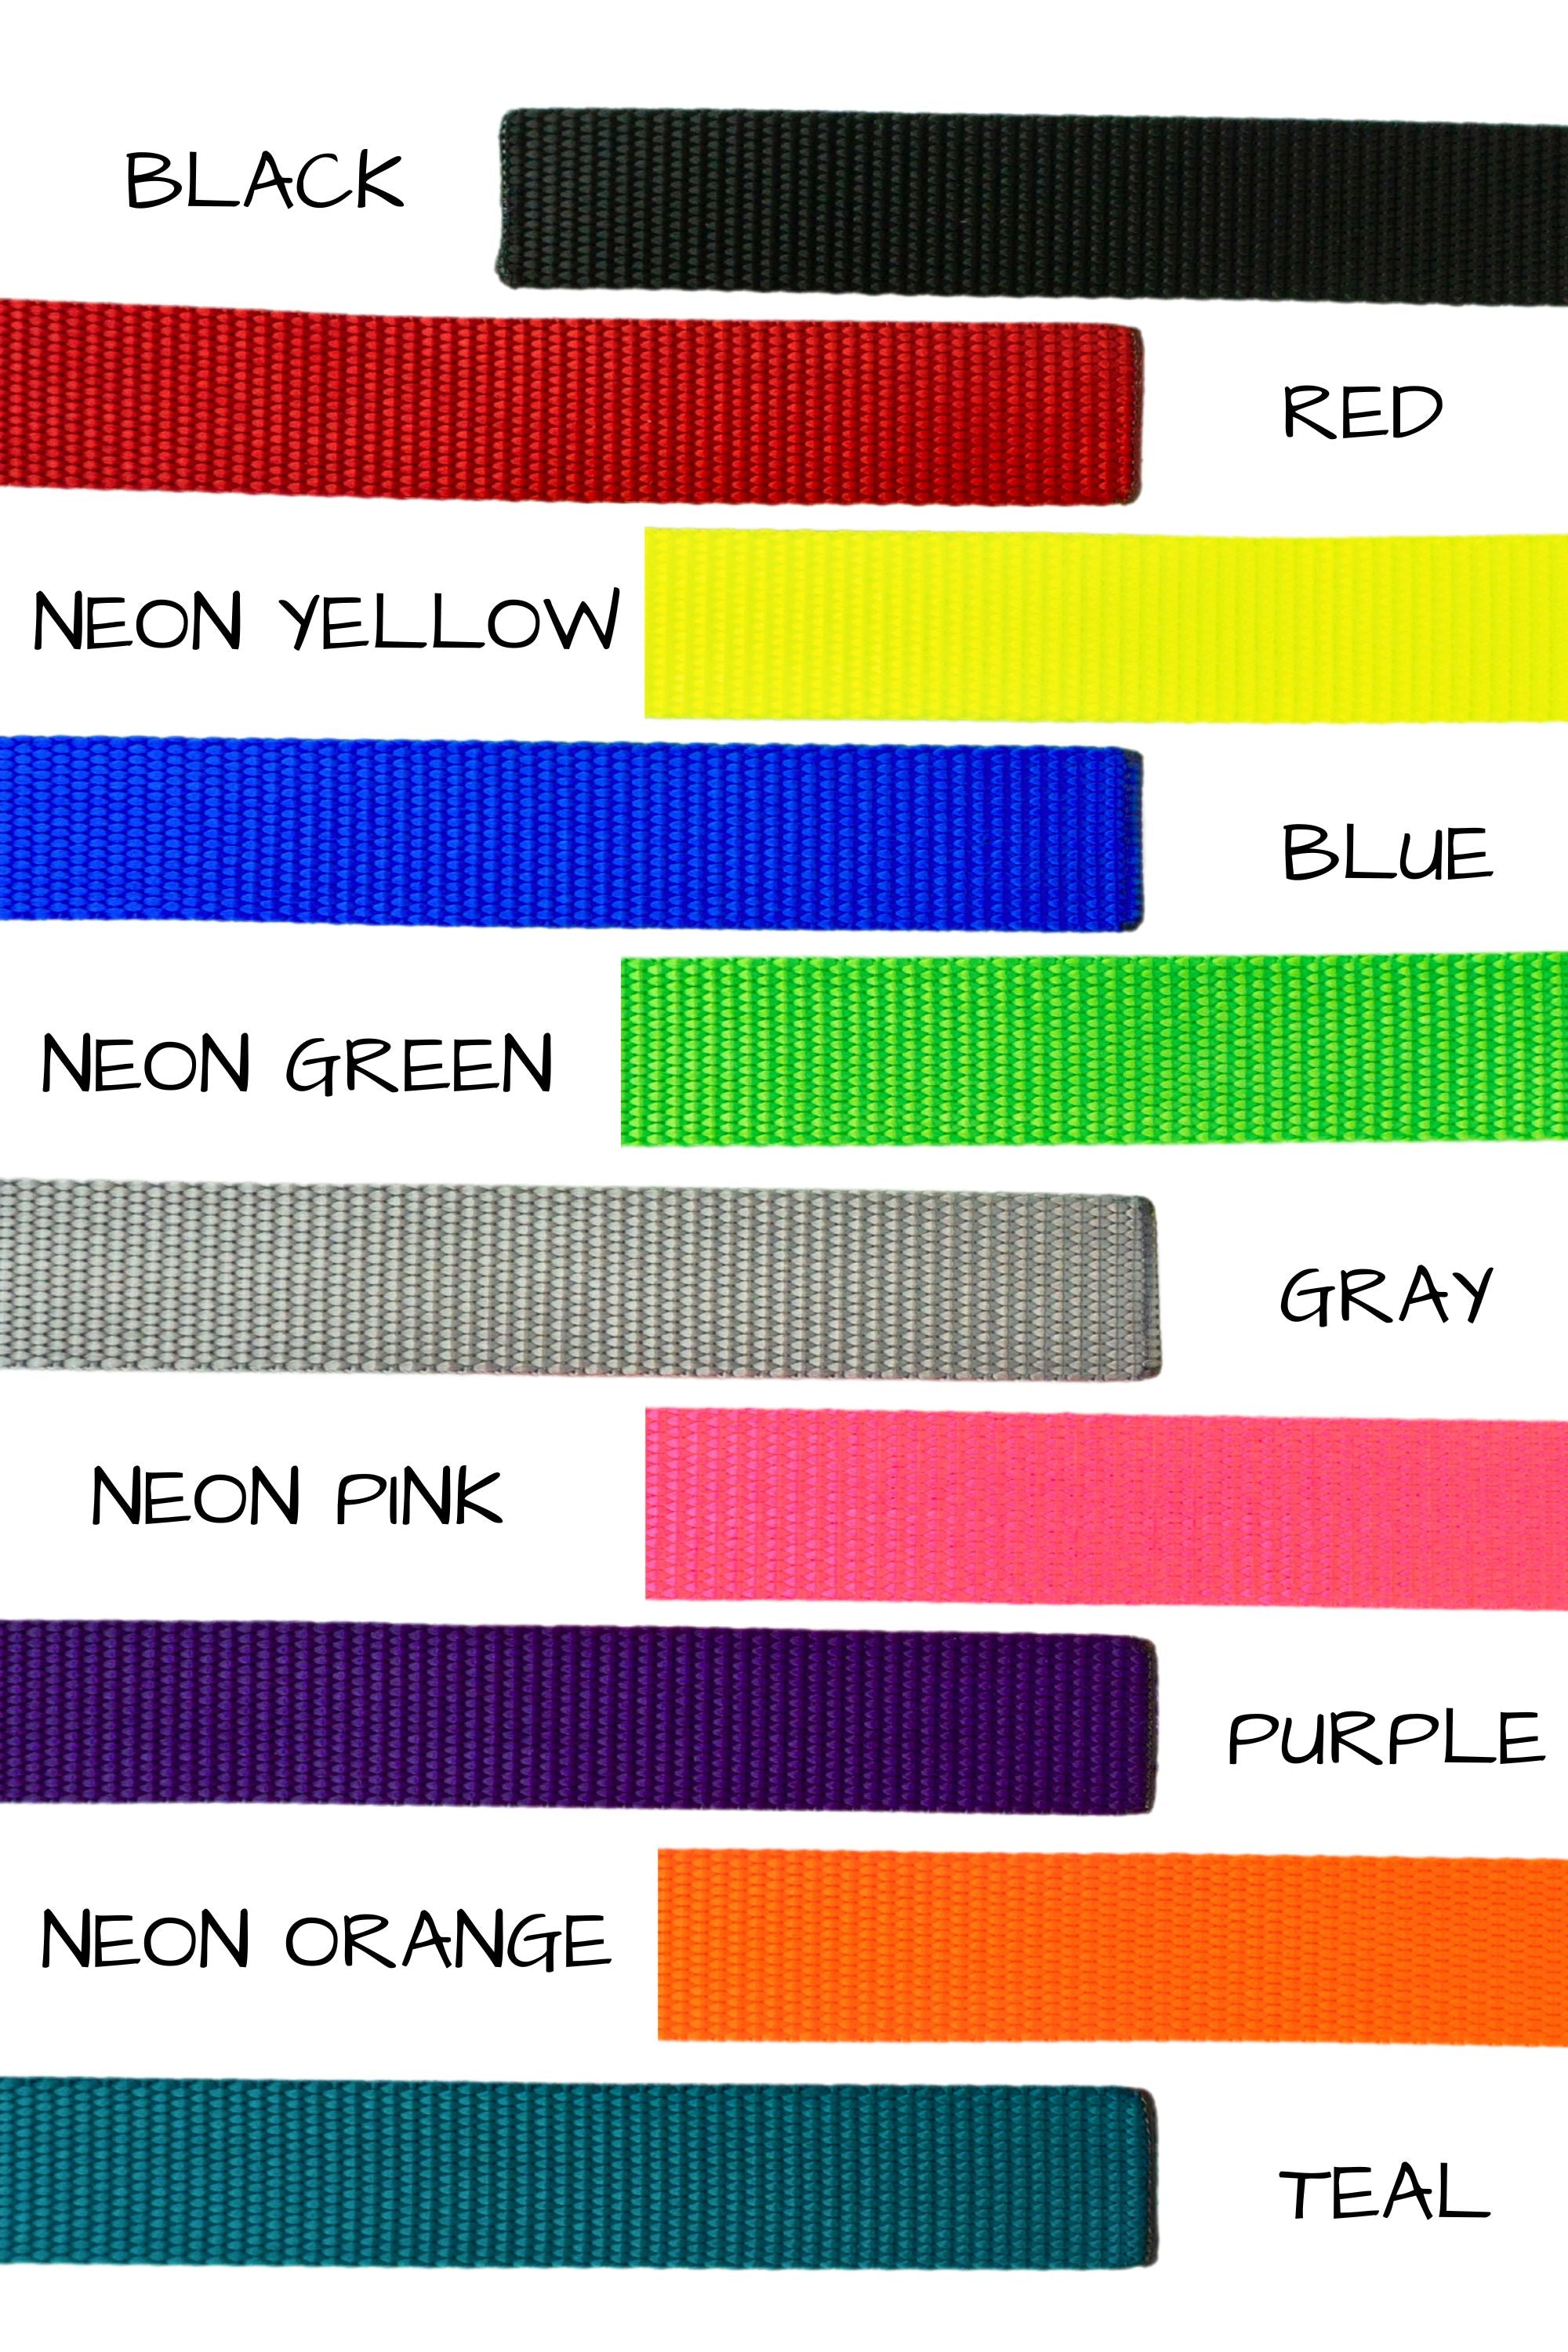 Double backup straps are available in ten colors, including black, red, neon yellow, blue, neon green, gray, neon pink, purple, neon orange, or teal.